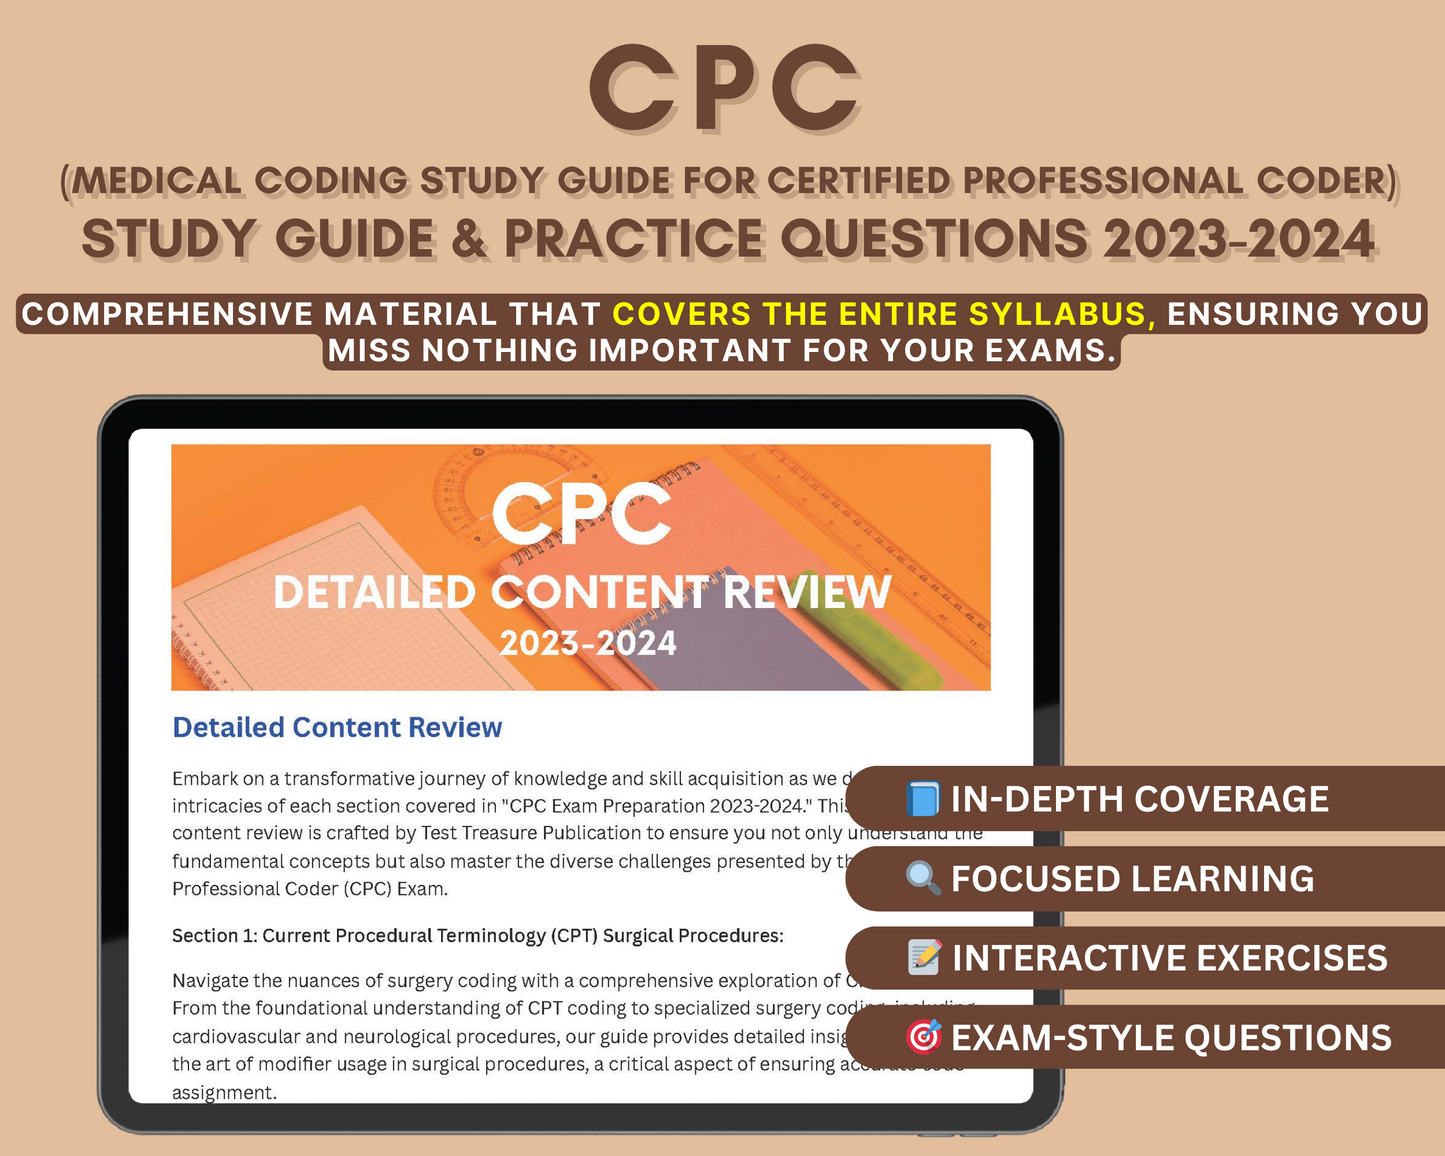 CPC Exam Study Guide 2023-2024: In-Depth Content Review, Practice Tests & Exam Tips for Certified Professional Coders